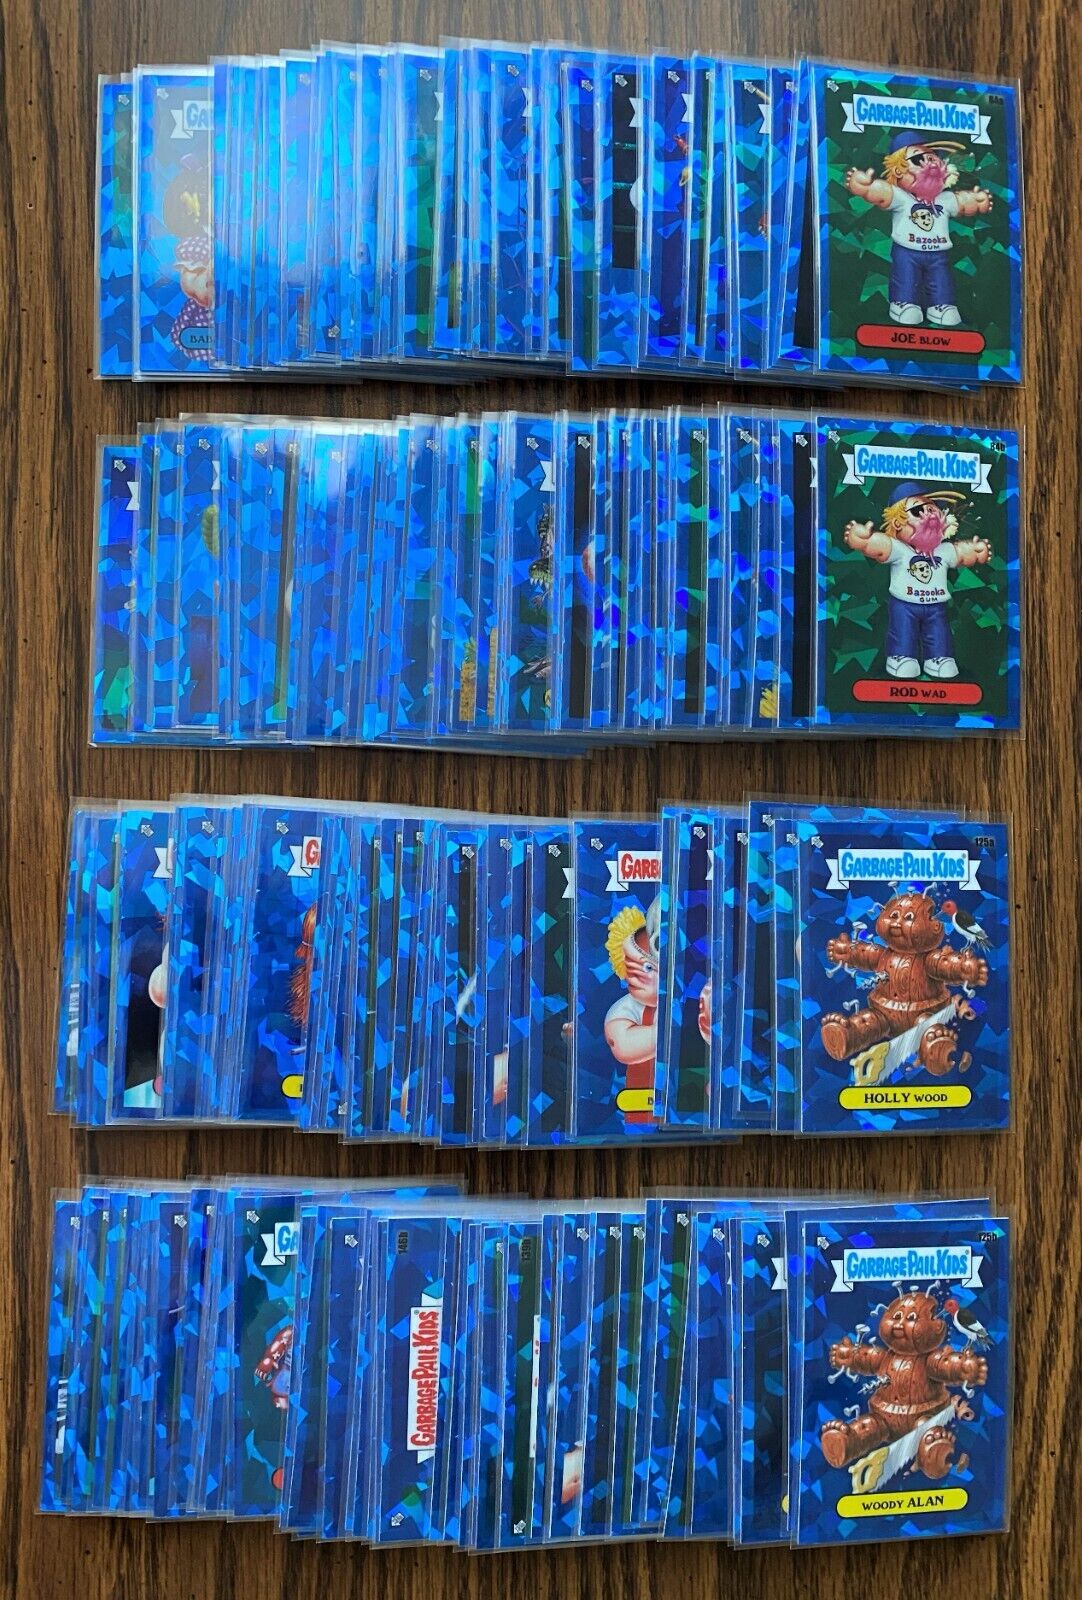 2021 Topps Garbage Pail Kids Sapphire Complete Base Set w/ 170 Cards OS3 + OS4